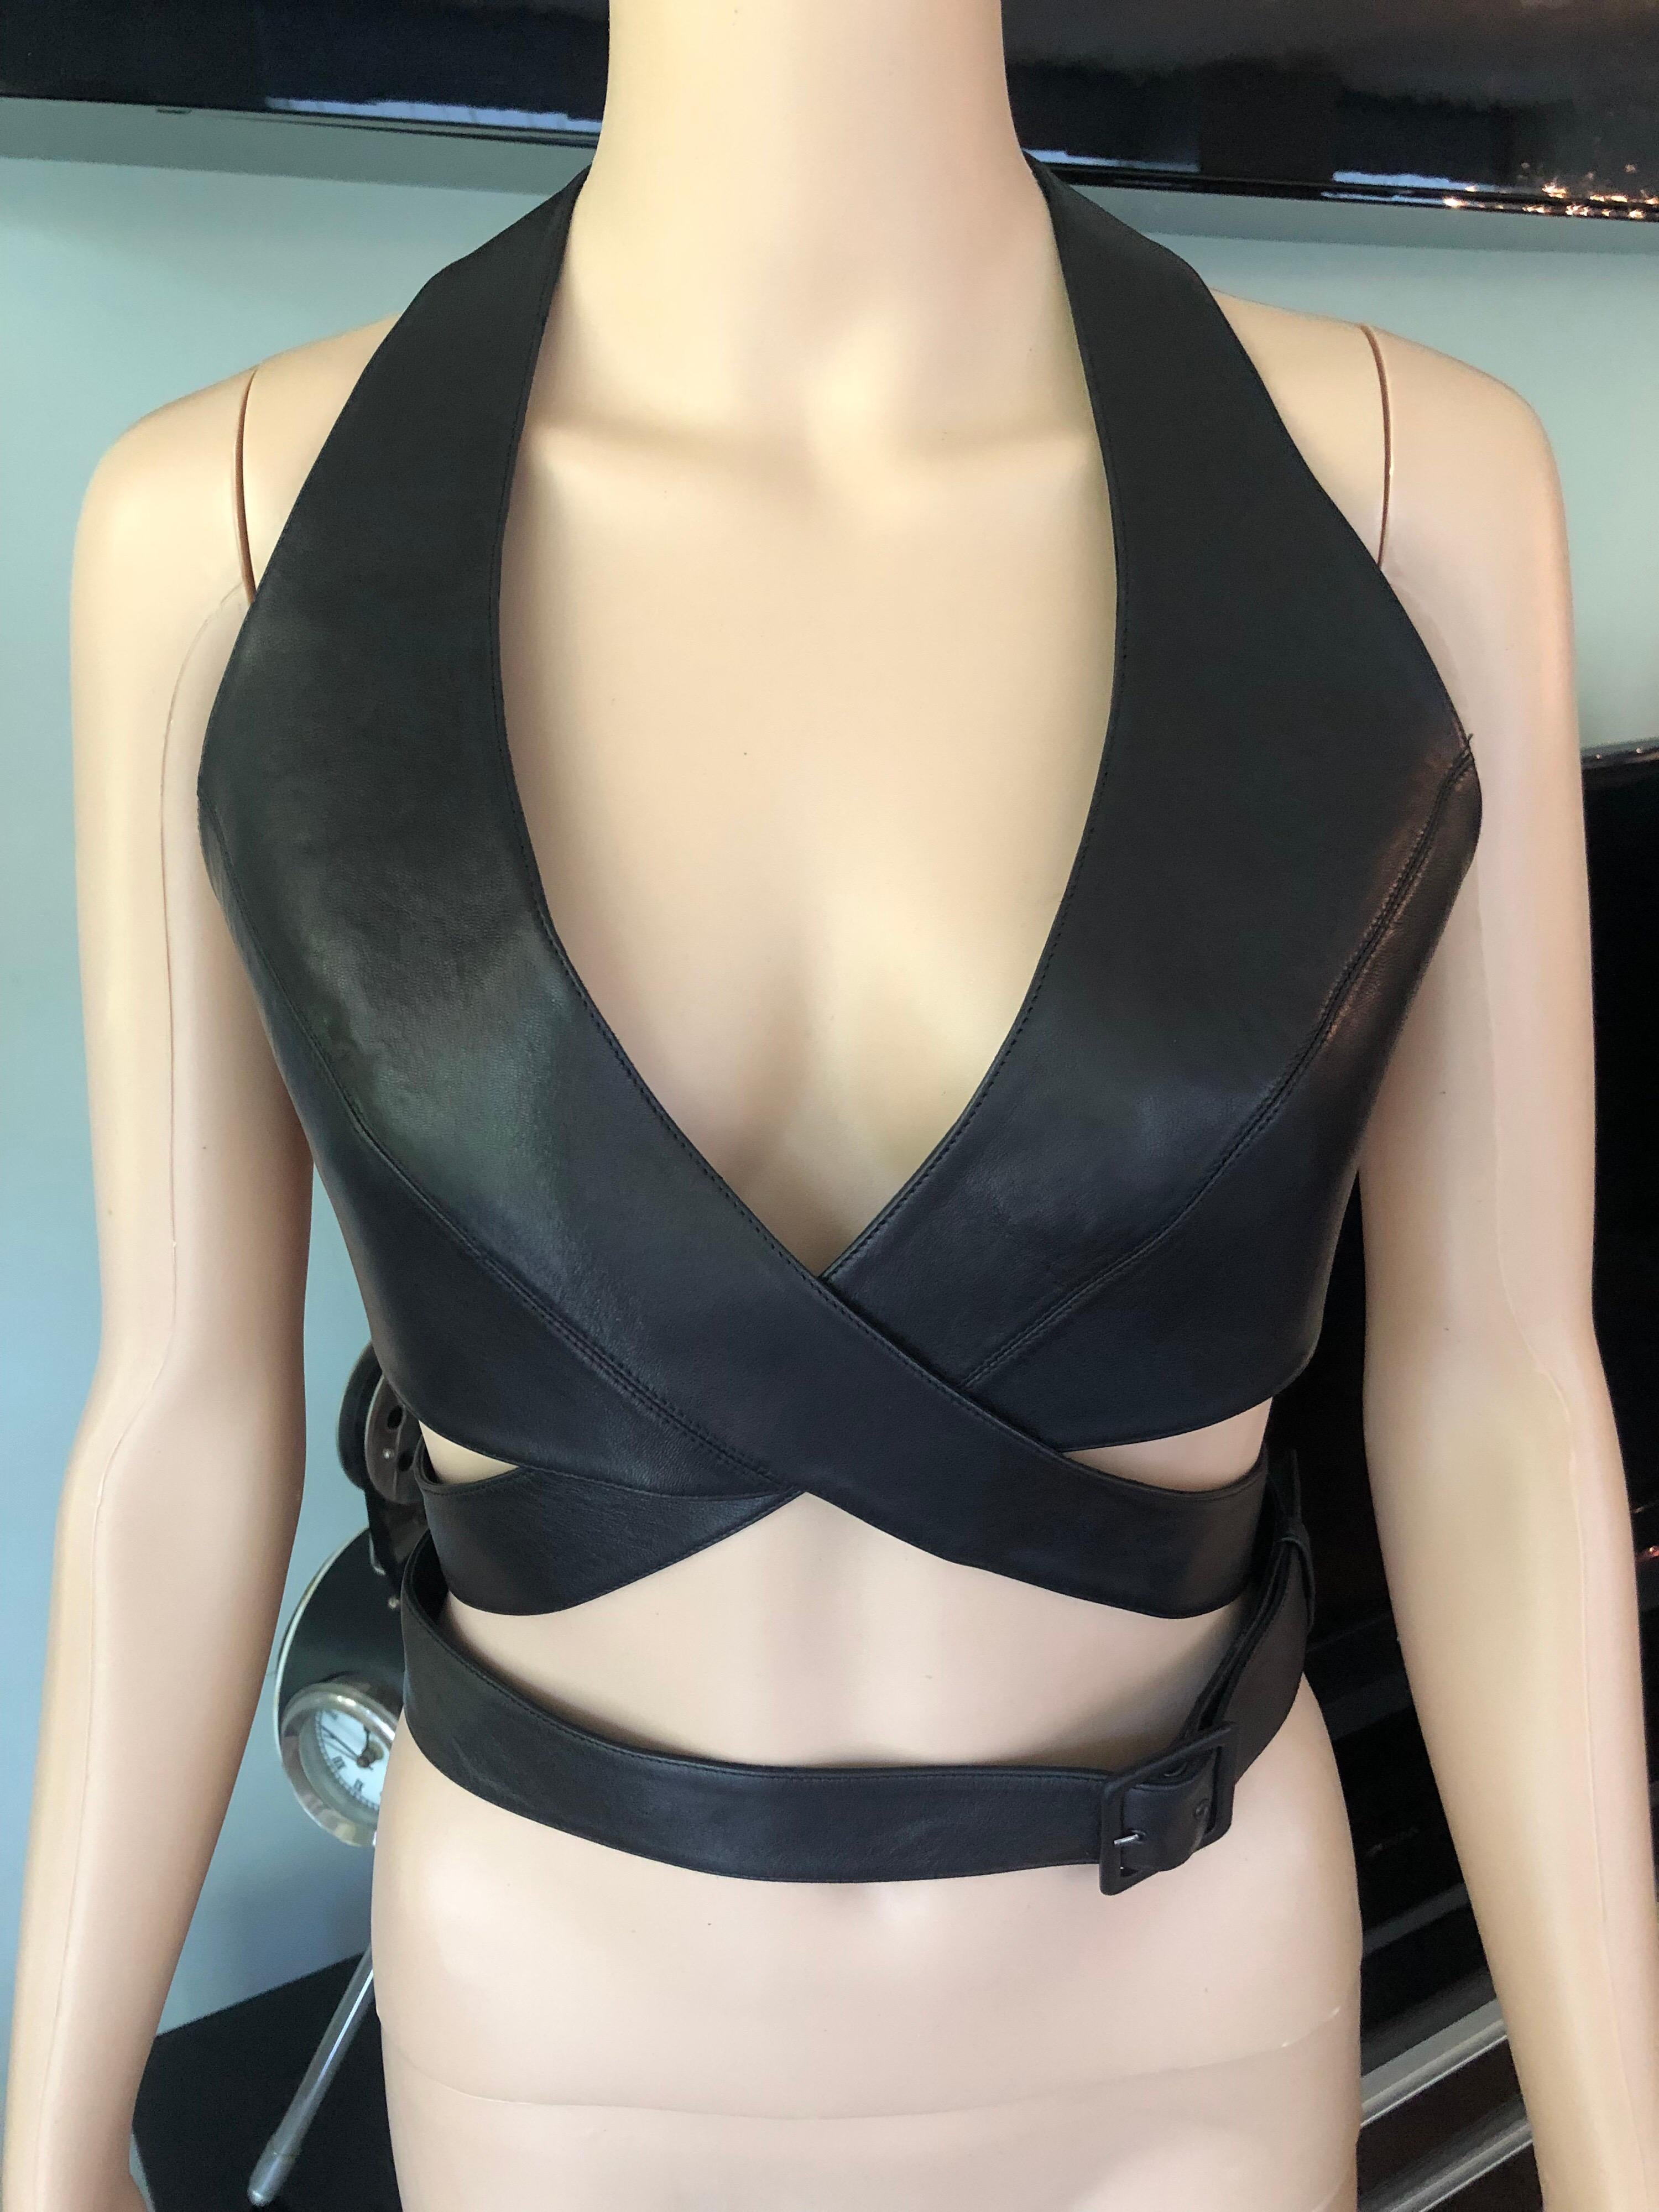 Sexy Alaïa black leather wrap top with belted waist.

All Eyes on Alaïa

For the last half-century, the world’s most fashionable and adventuresome women have turned to Azzedine Alaïa for body-enhancing clothes that give them beauty, sensuality, and